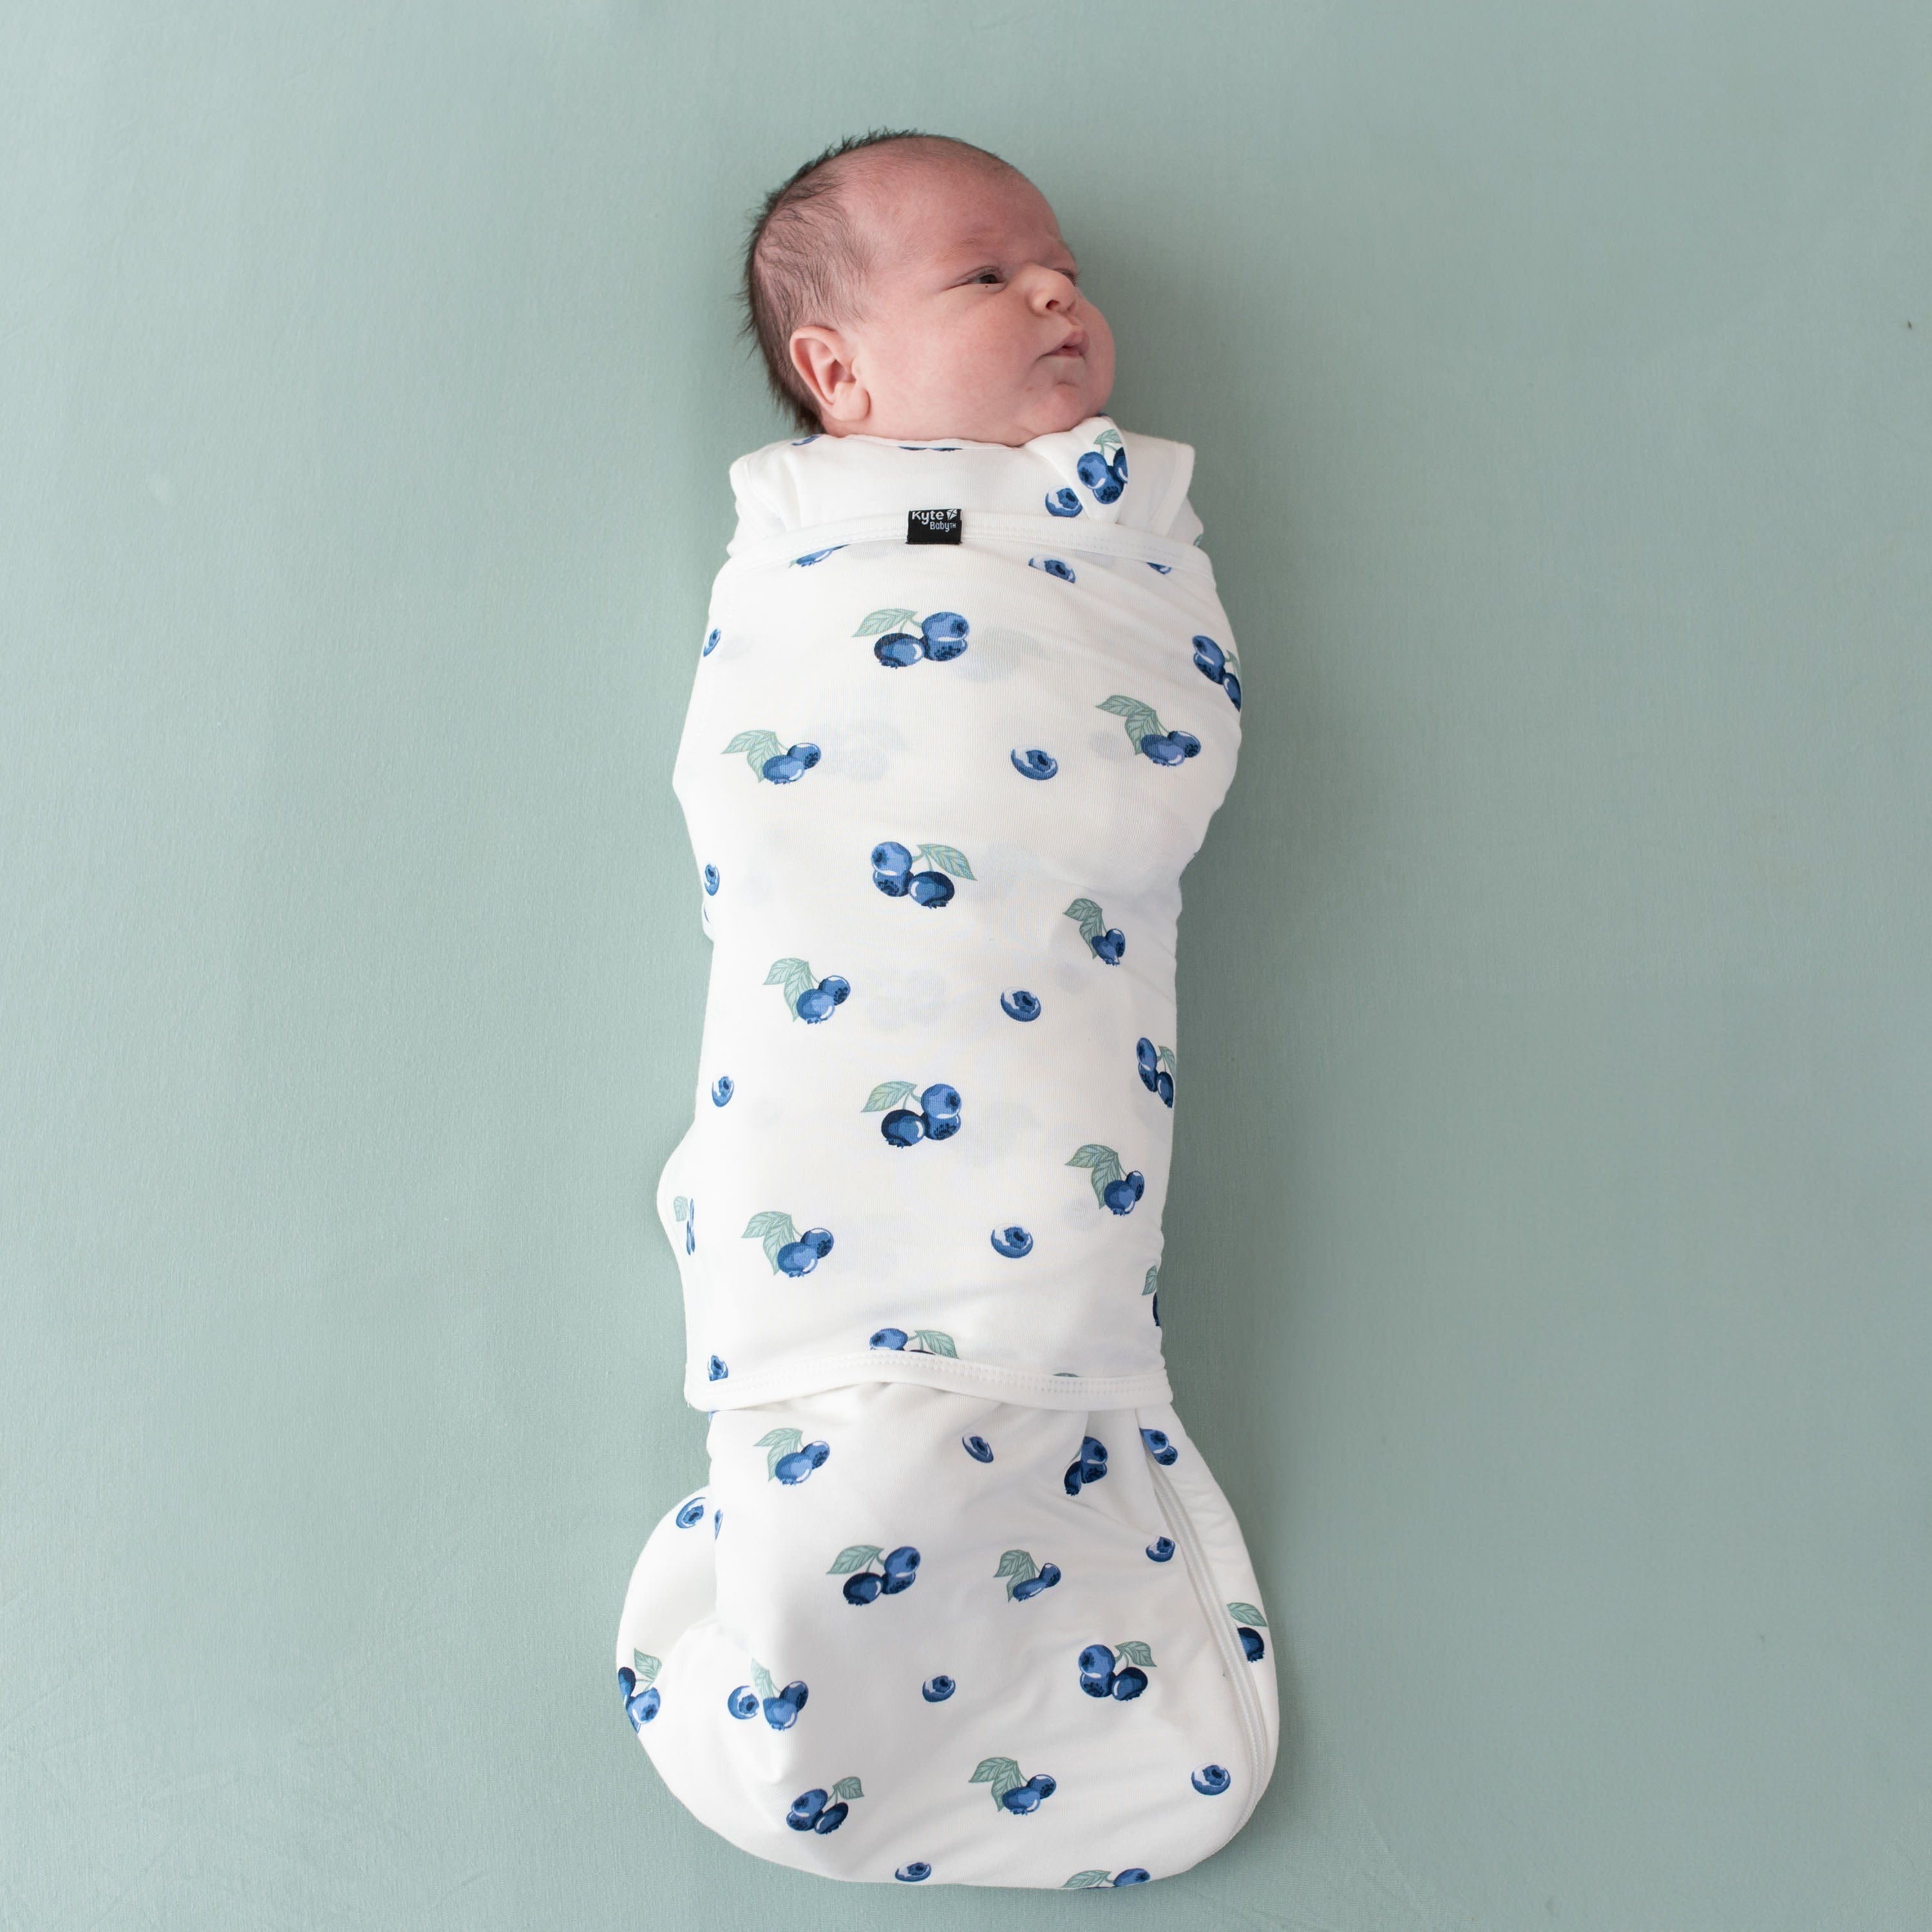 Kyte Baby - Swaddle Blanket - Midnight TAX FREE at Posh Baby